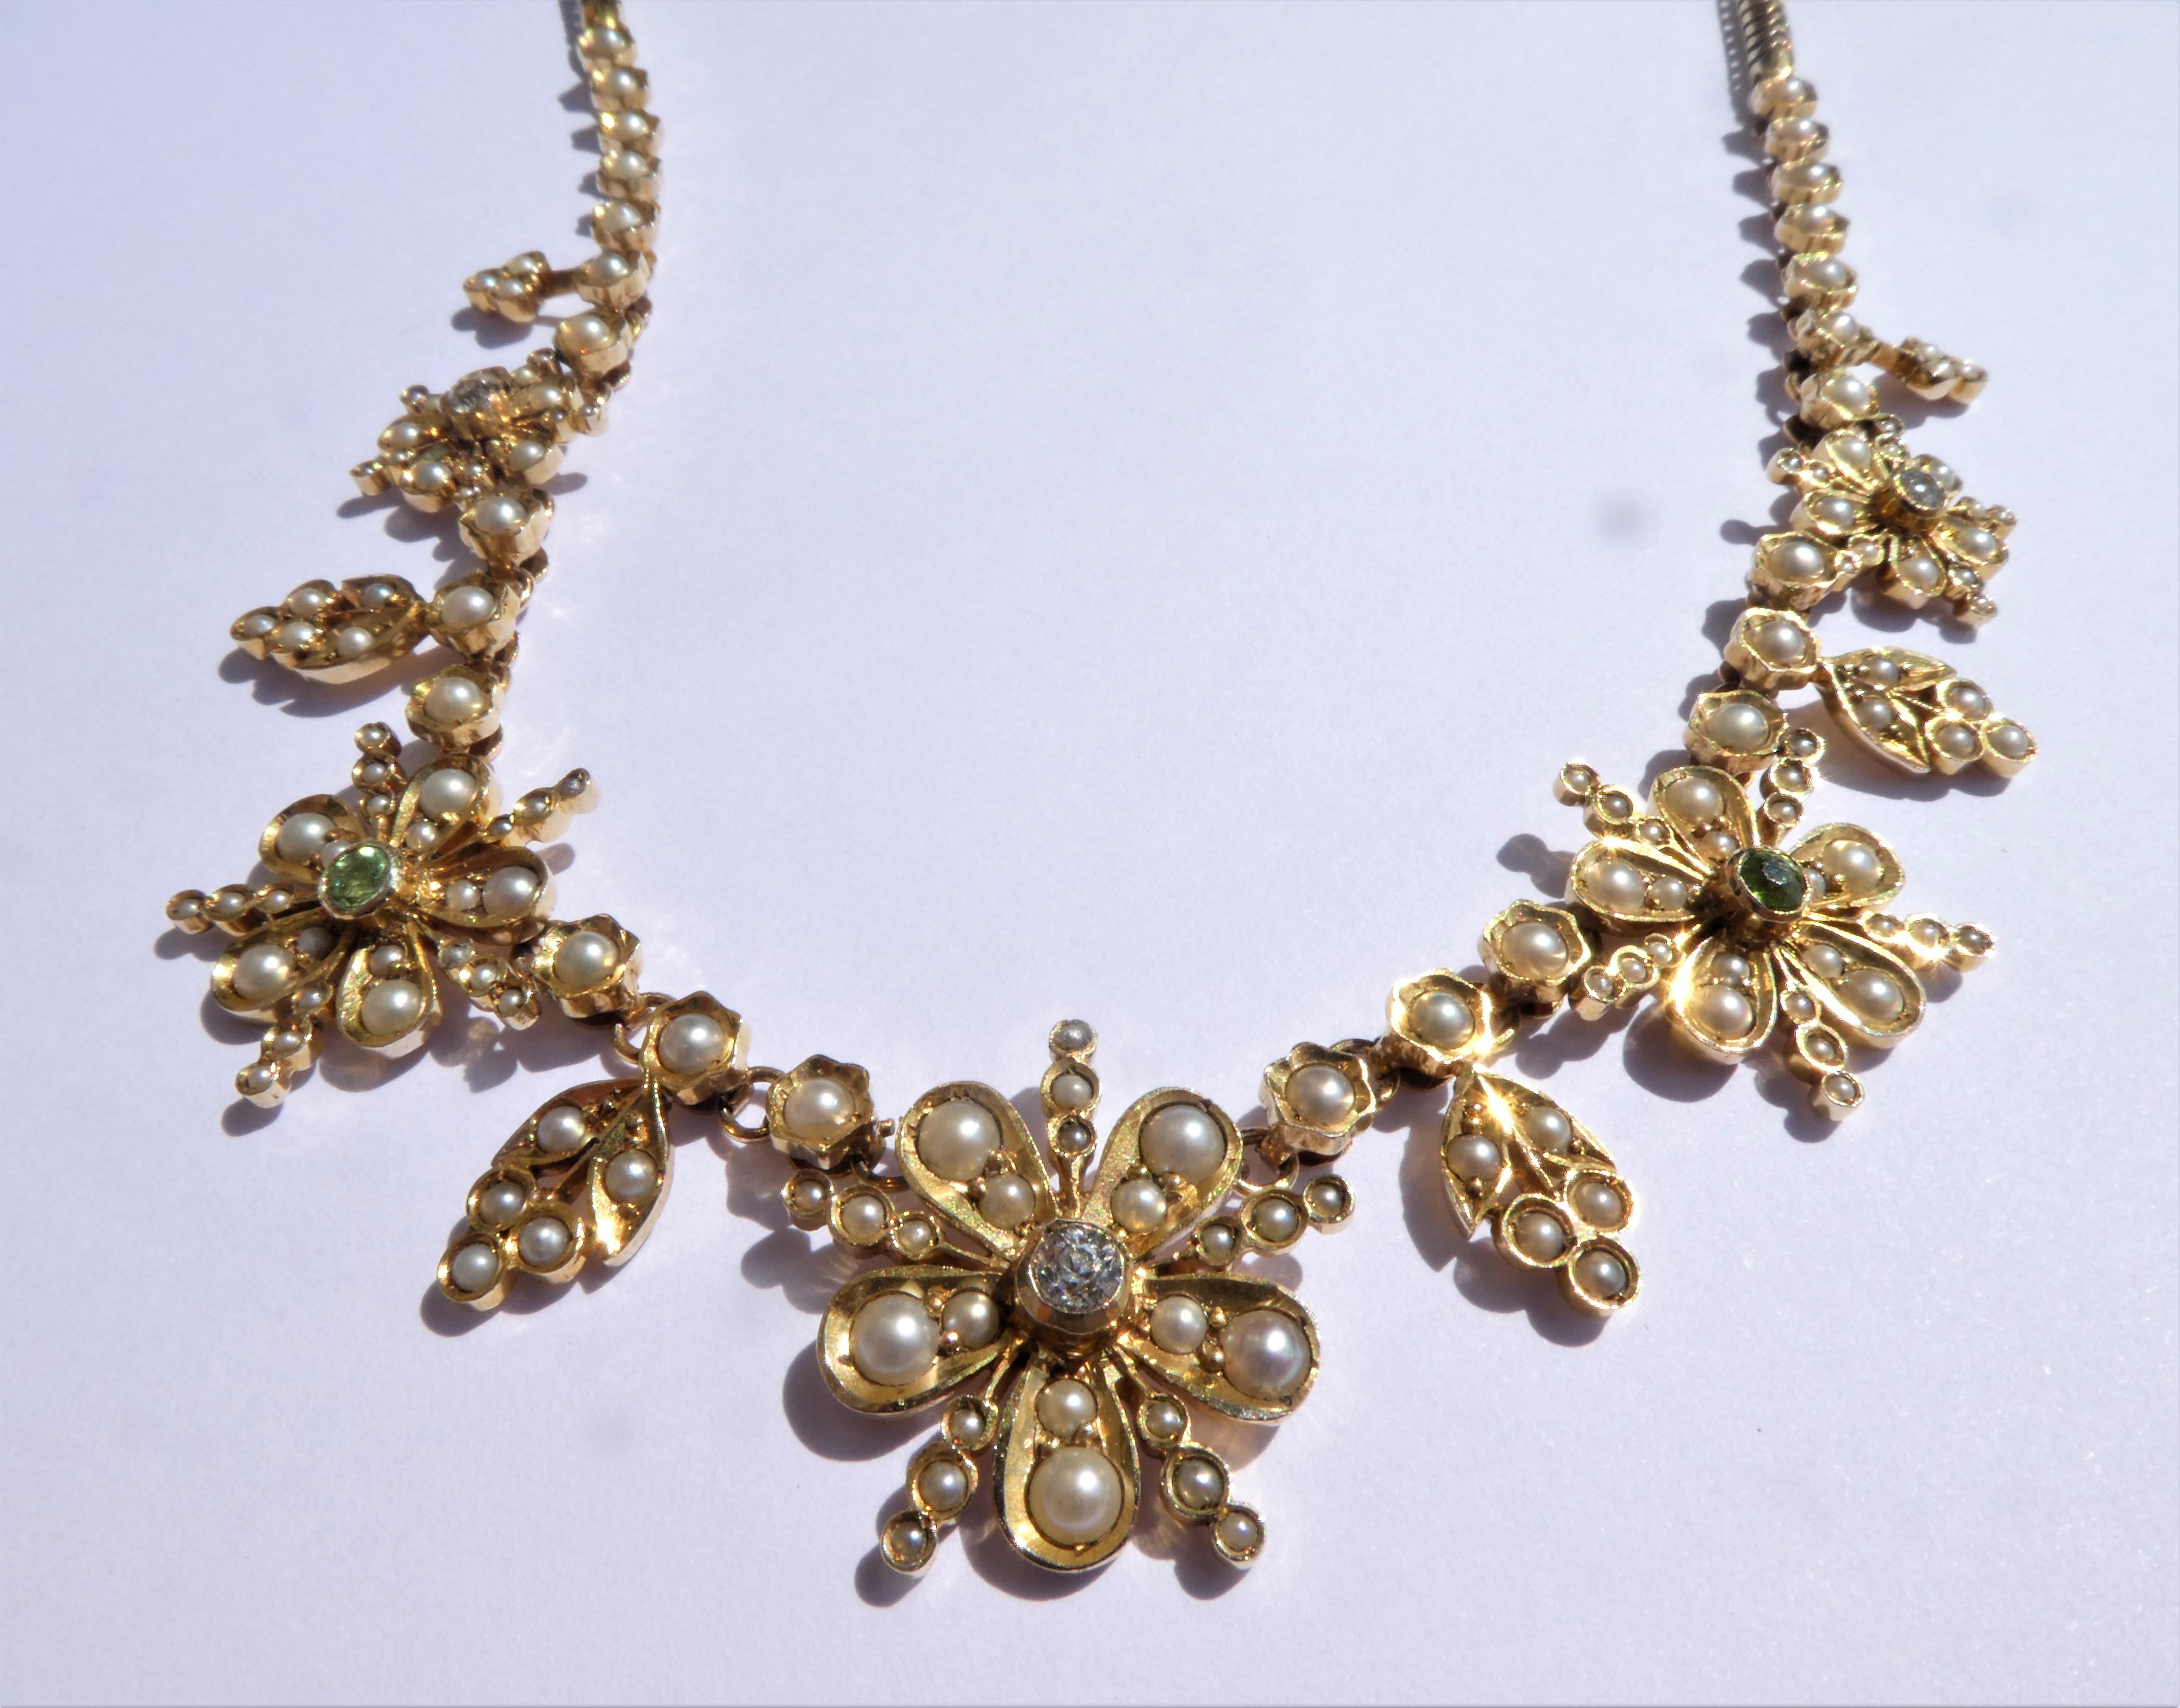 This diamond, peridot and half-pearl necklace is typical of the period around 1890 in England. It is designed as a row of five flowerheads connected by a chain with foliate motifs. The necklace was crafted in 14 karat yellow gold with white natural